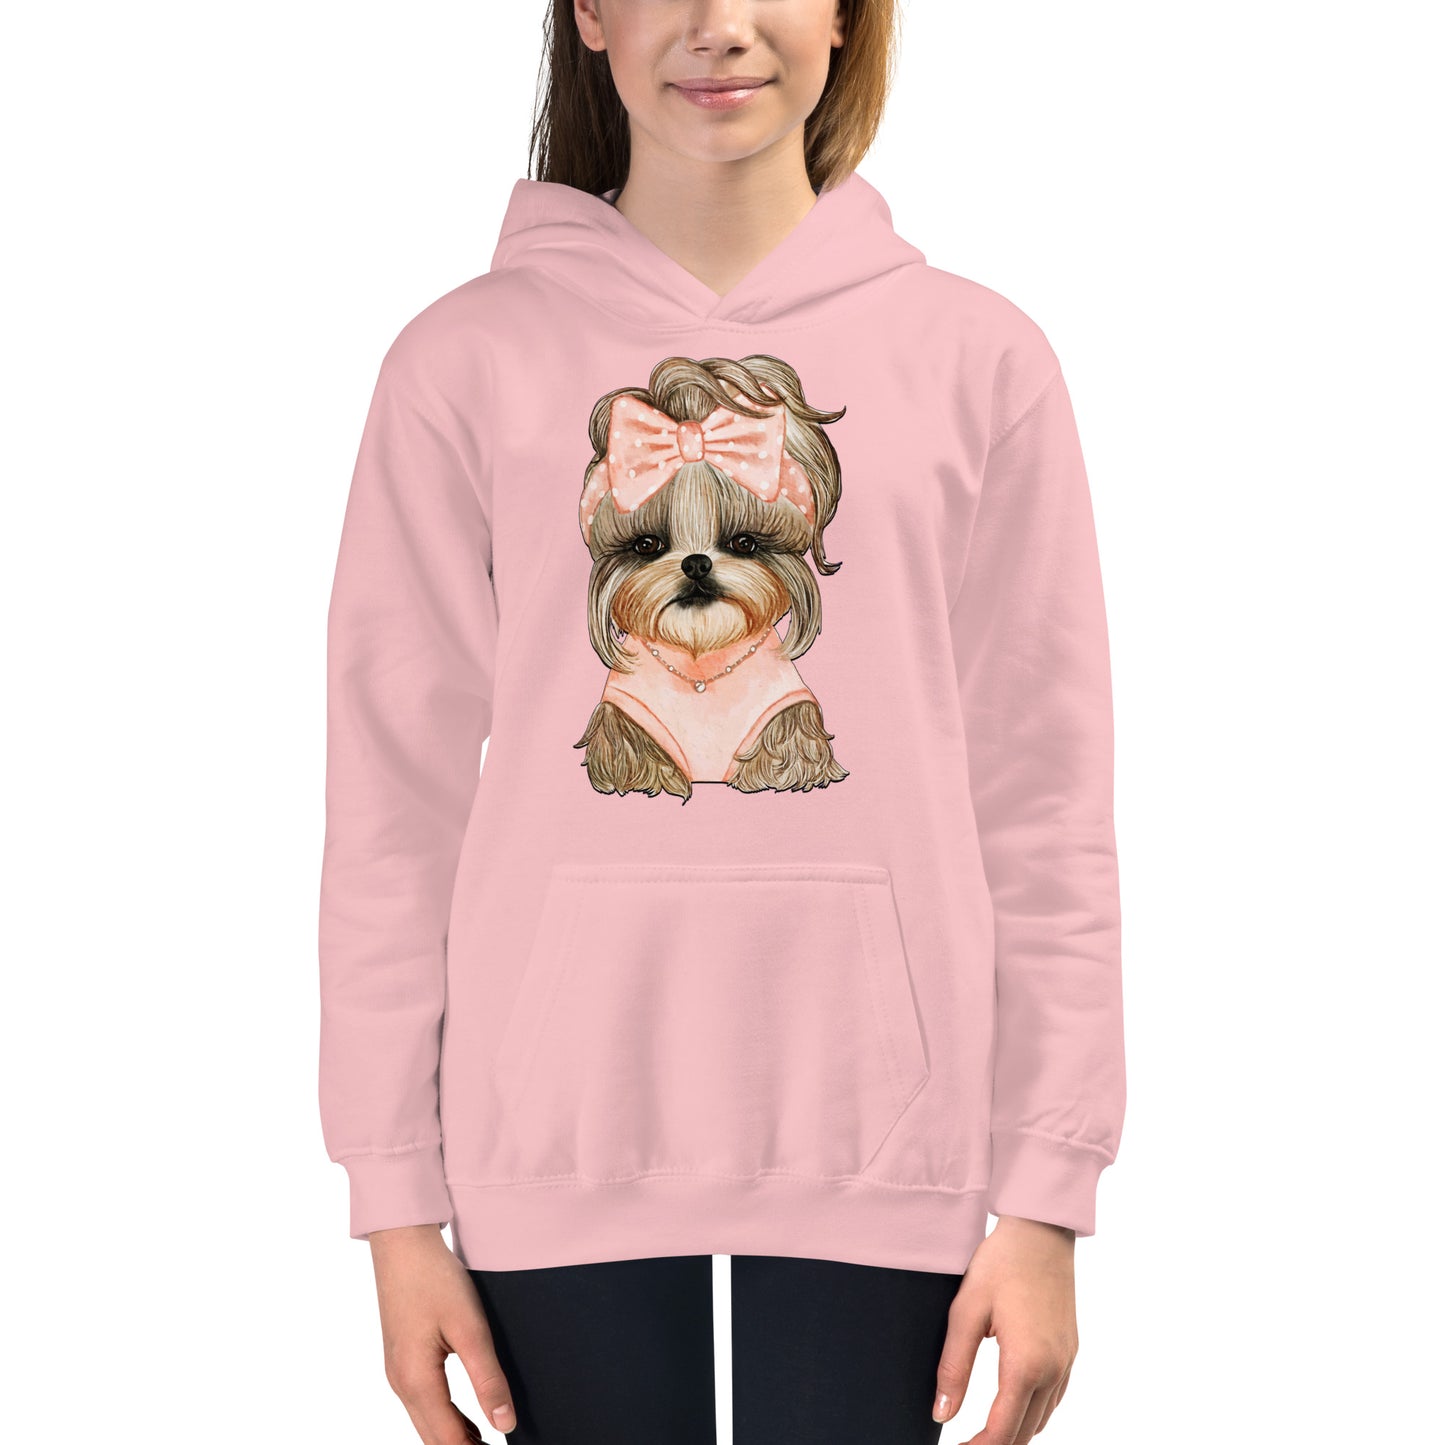 Adorable Dog with Cute Hair Ribbon Hoodie, No. 0561